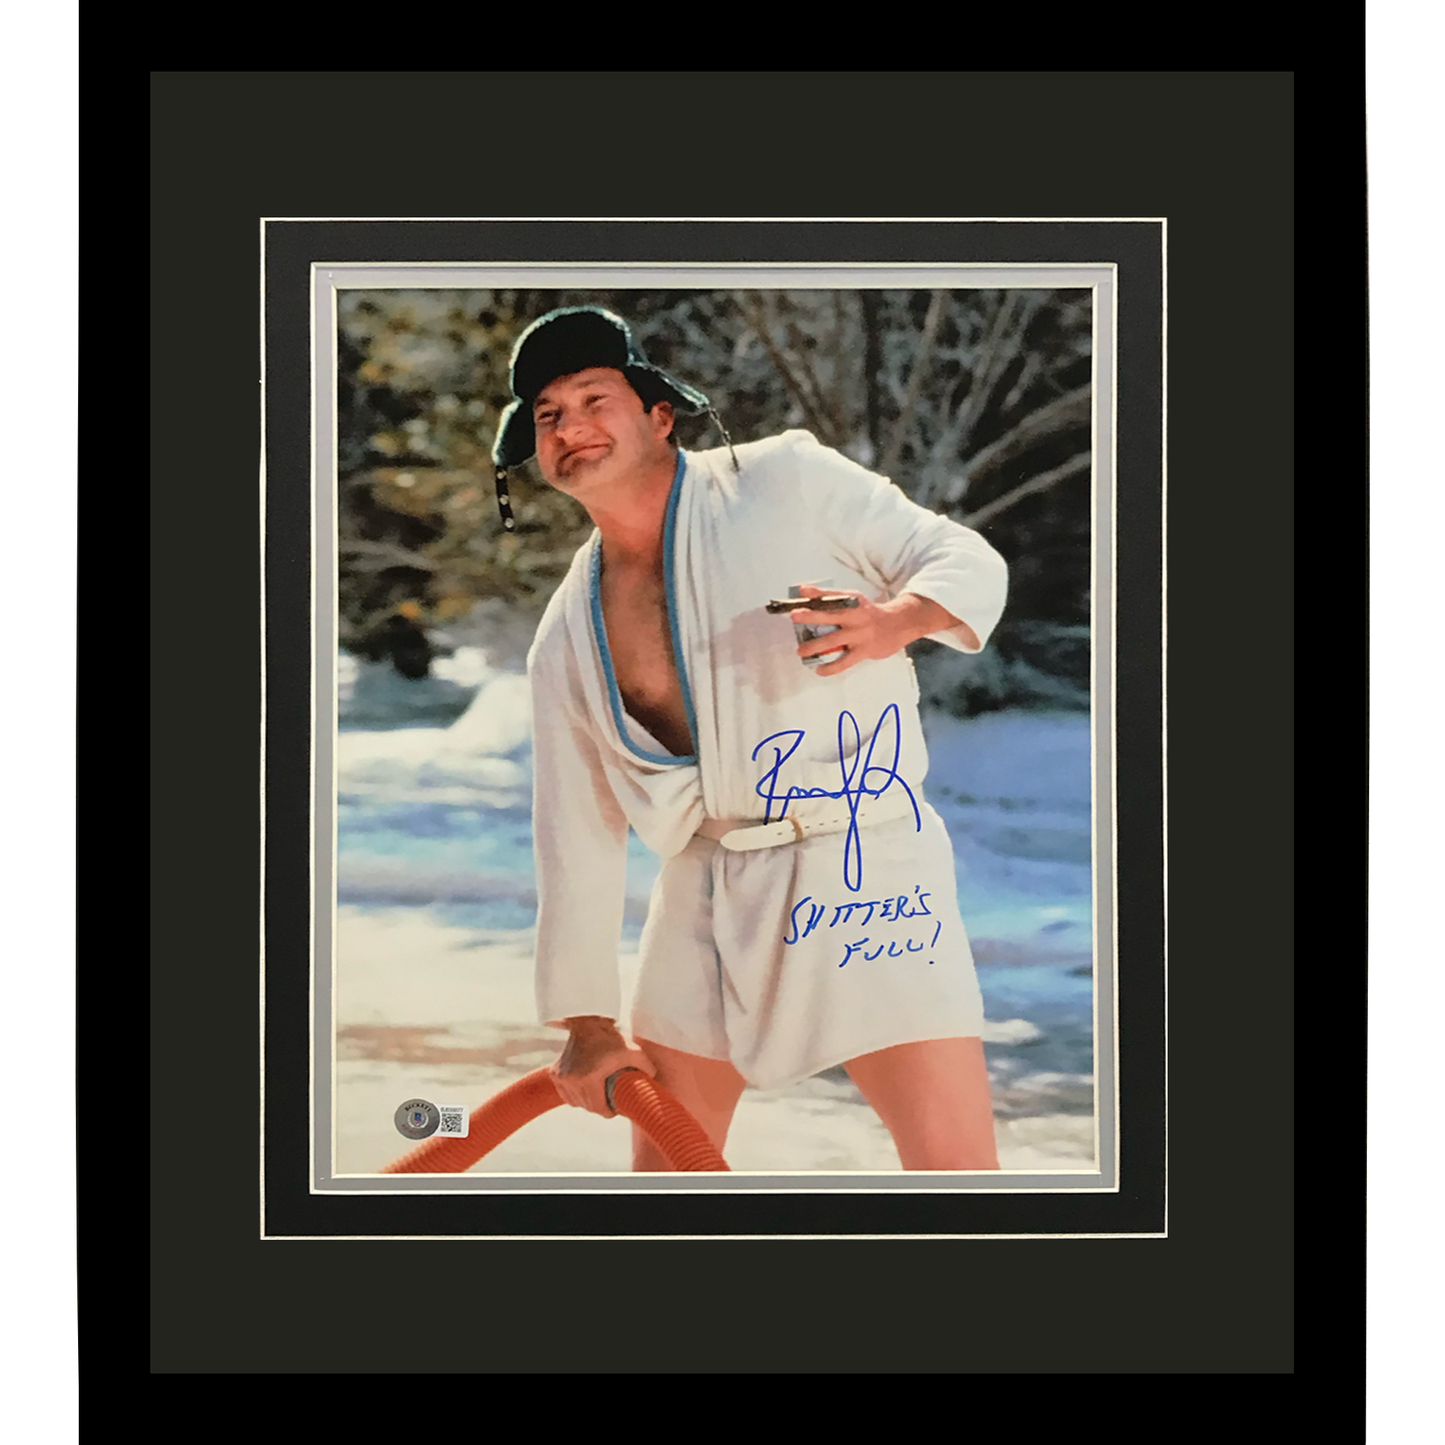 Randy Quaid Cousin Eddie Autographed National Lampoons Christmas Vacation Deluxe Framed 11x14 Photo w/ Shitters Full - Beckett